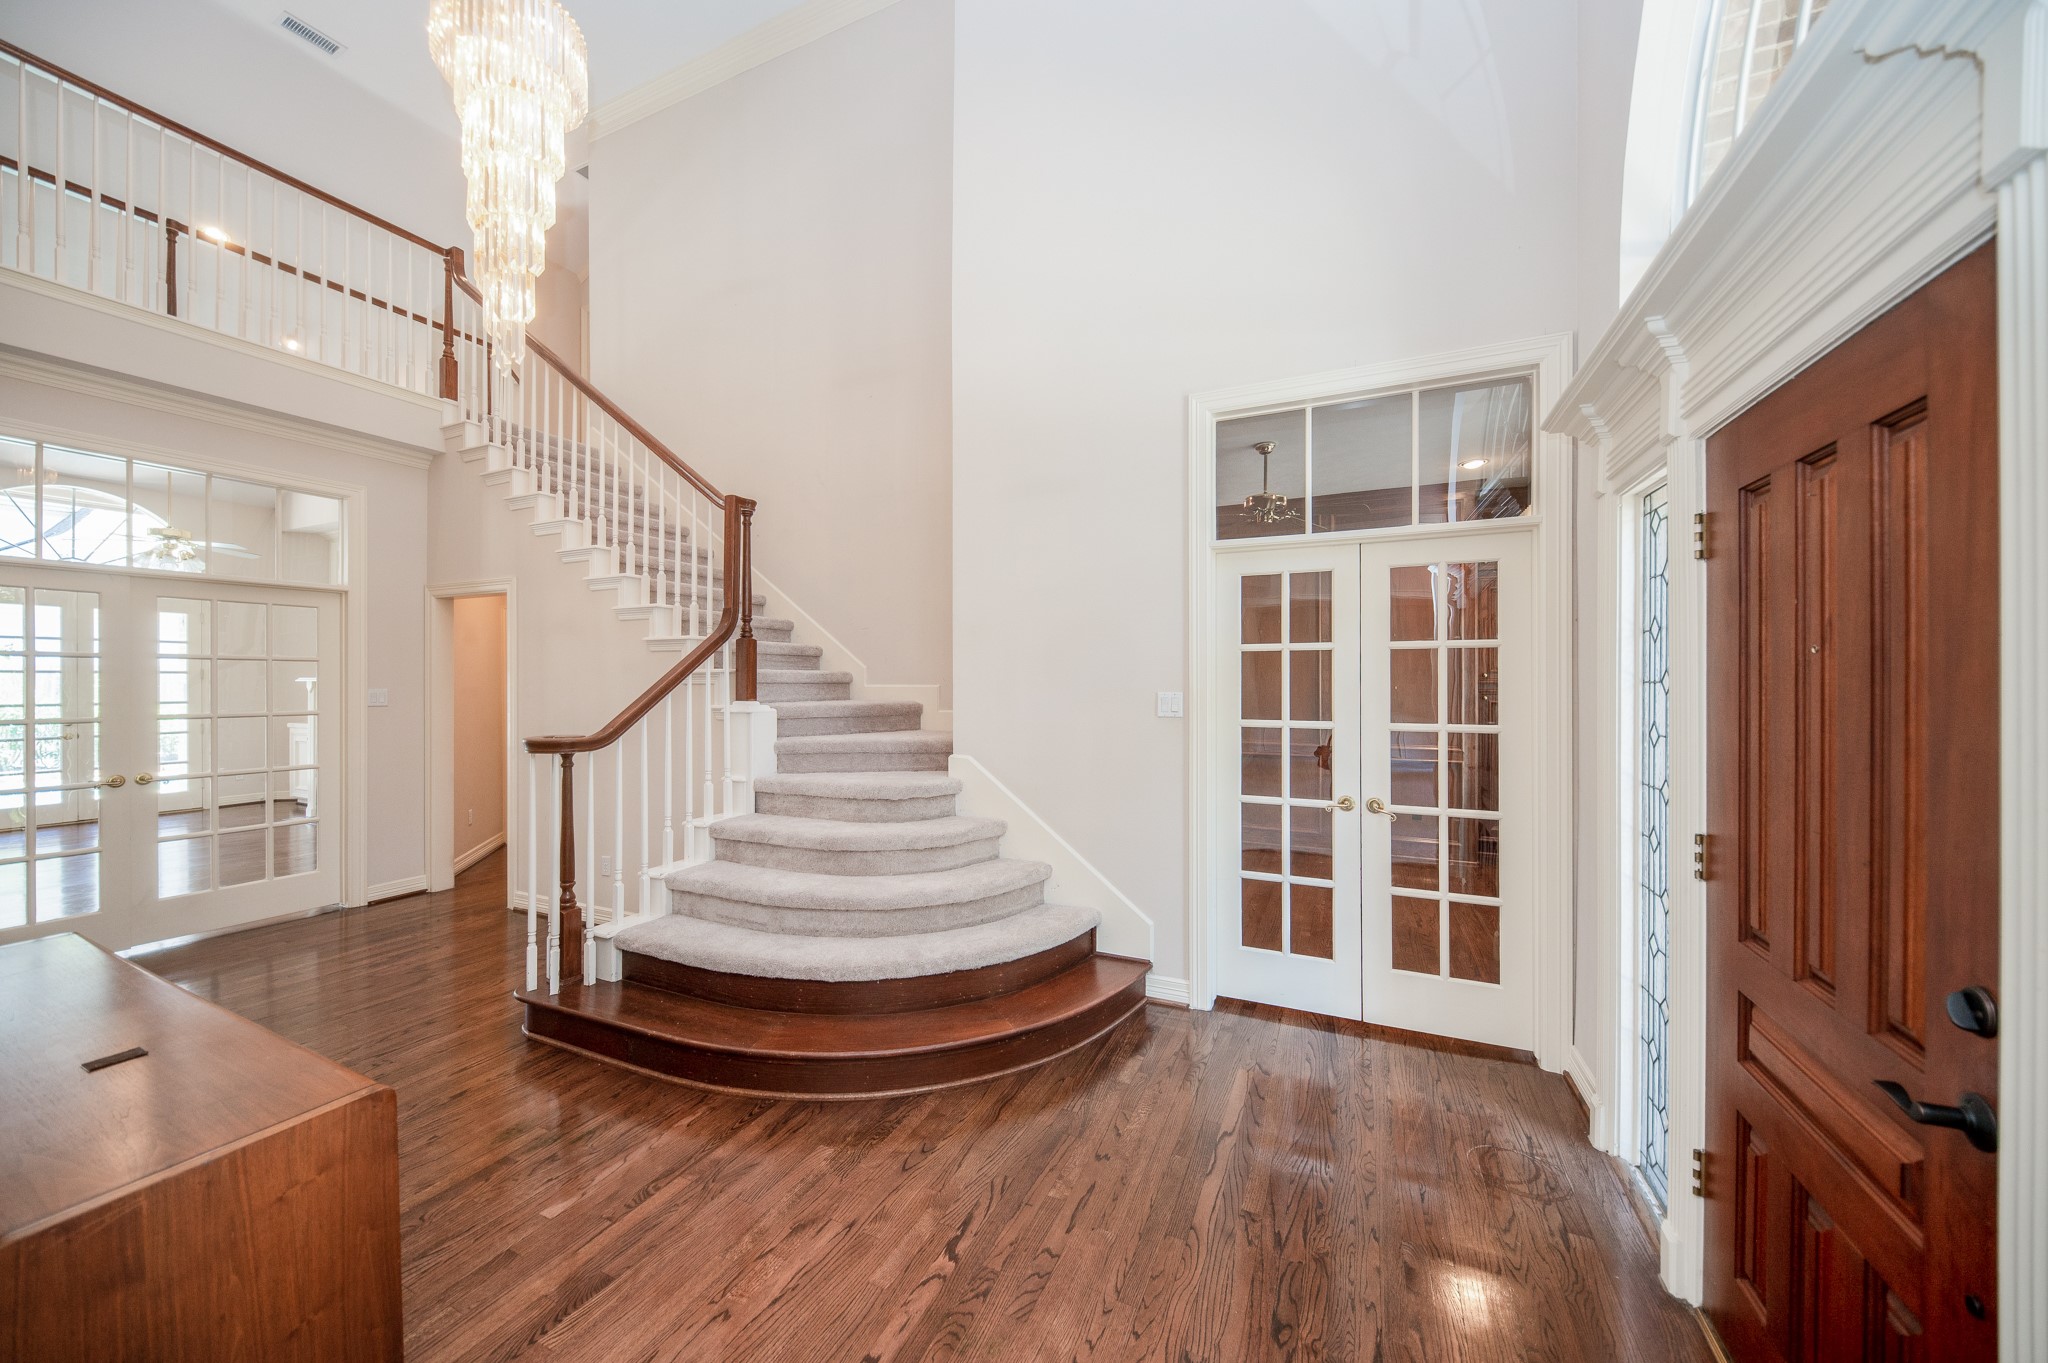 Upon entering the home you will be greeted by this grand staircase.